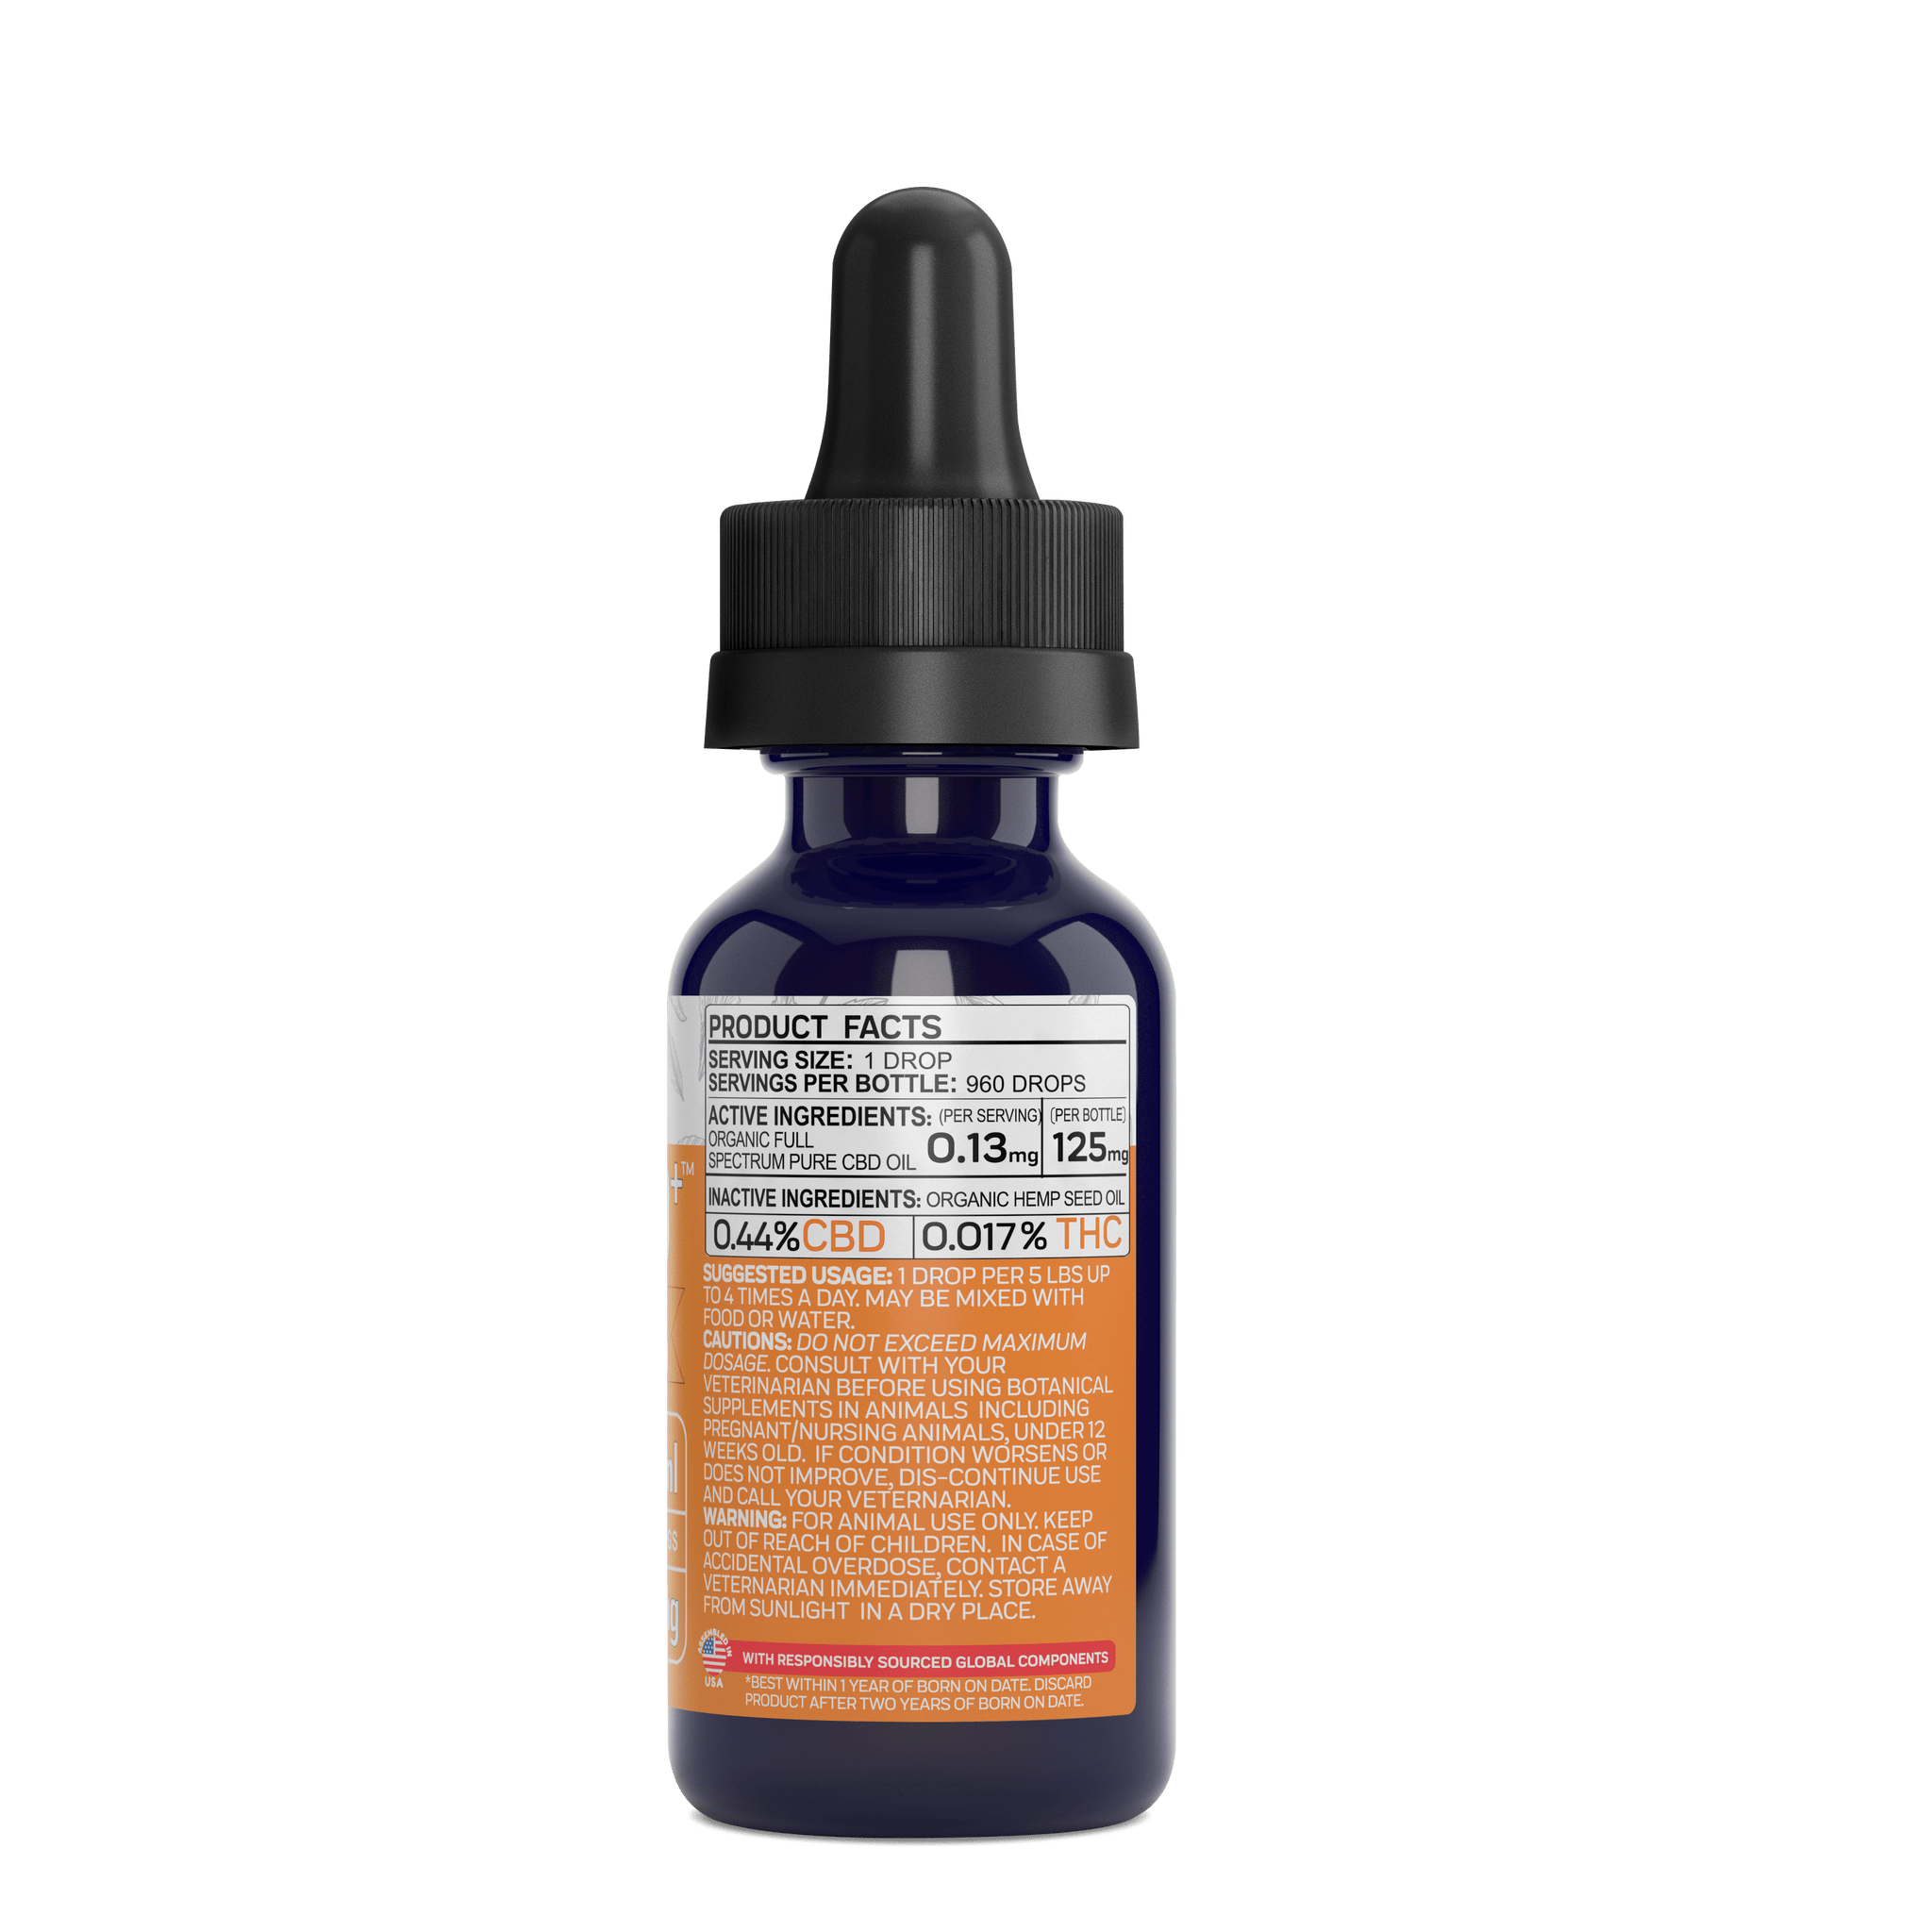 The #1 Rated CBD Oil for Cats - 100% Organic Full Spectrum